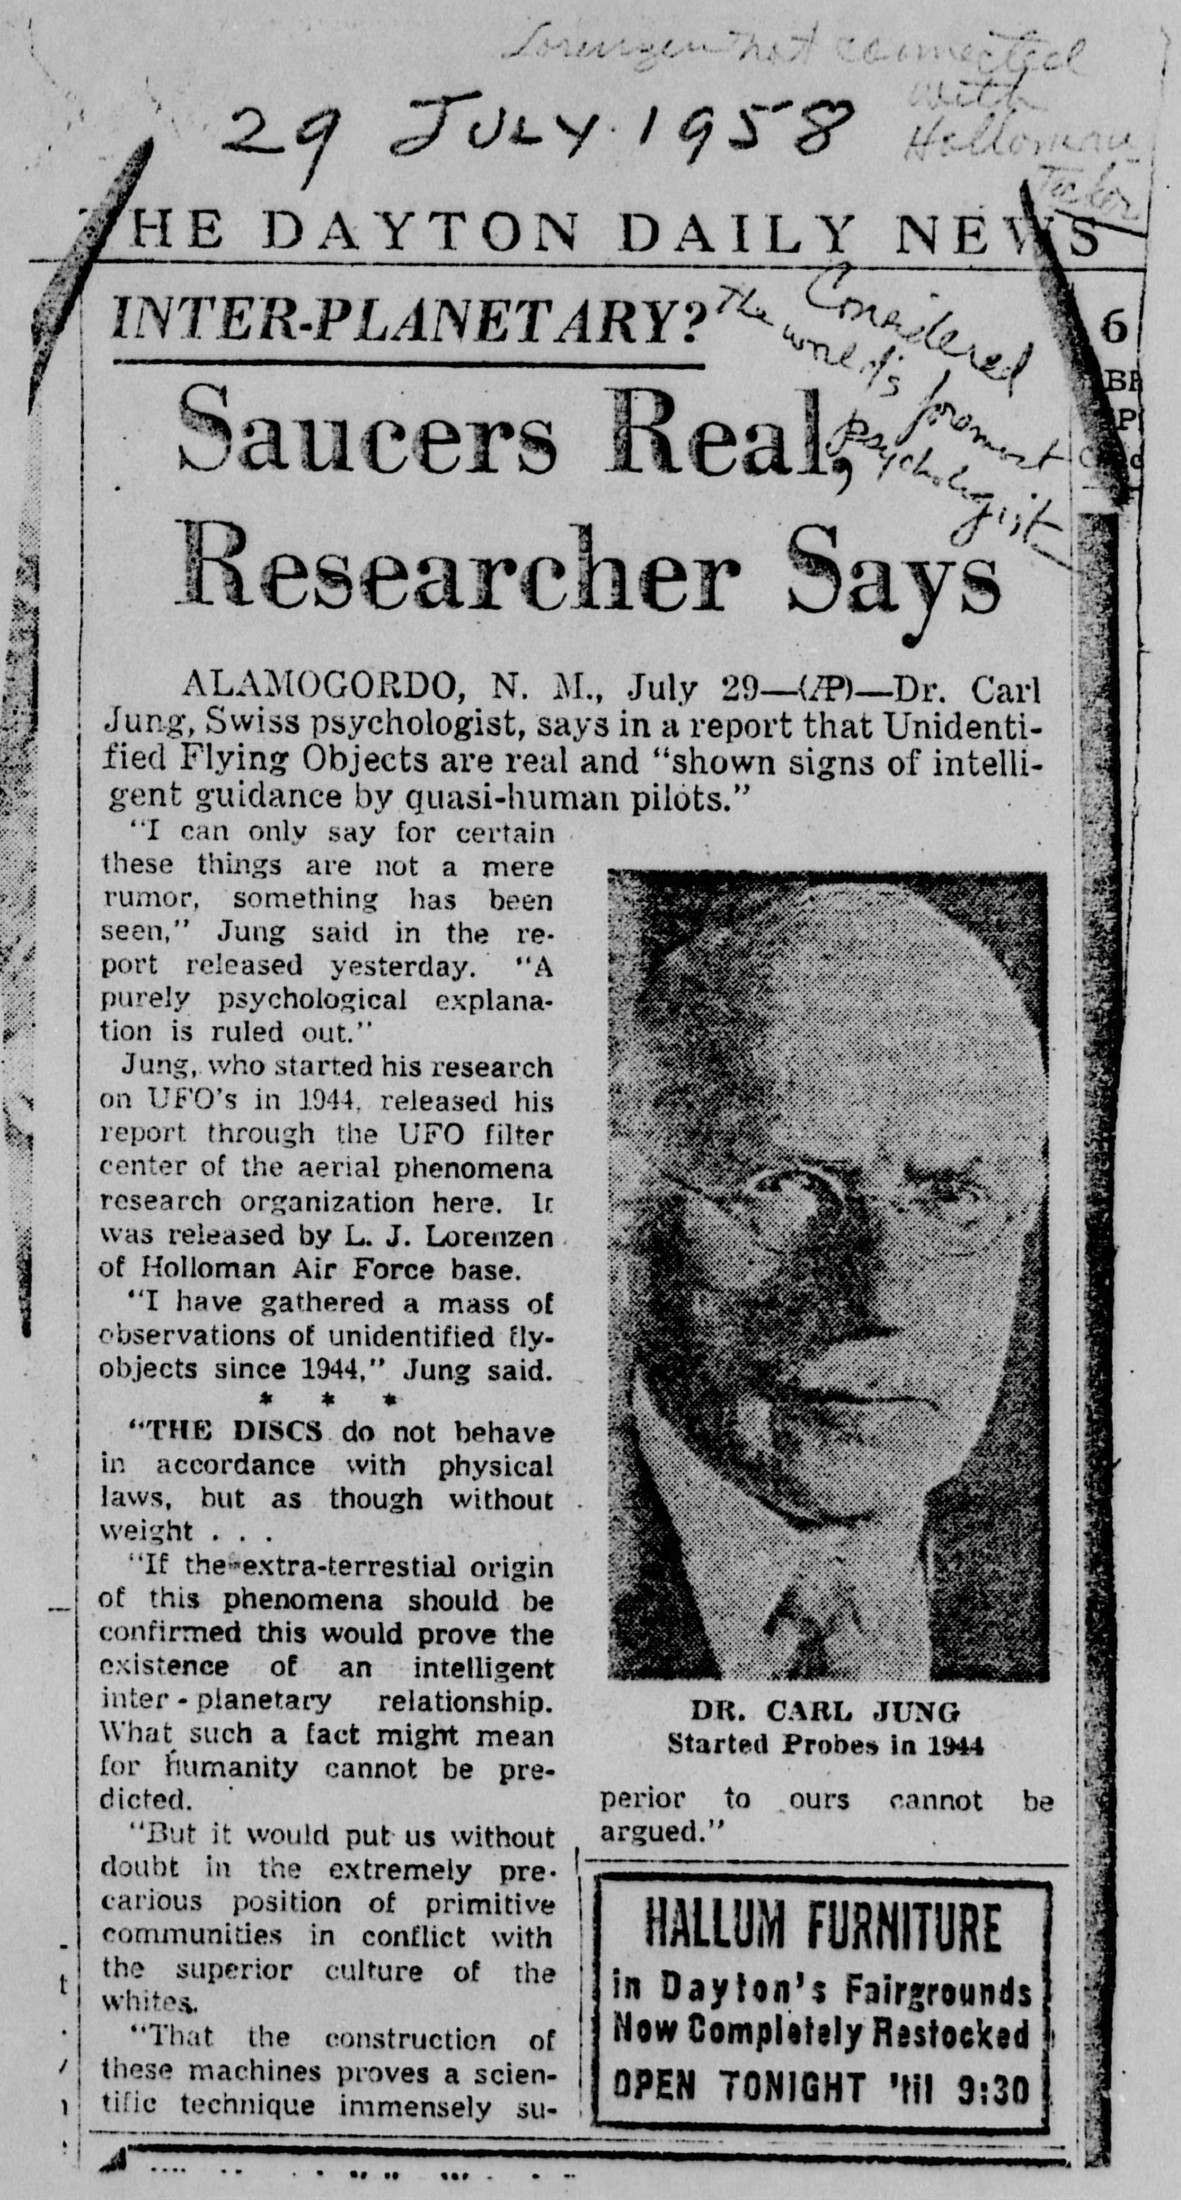 1958, Dayton Daily News, Saucers Real Researcher Says